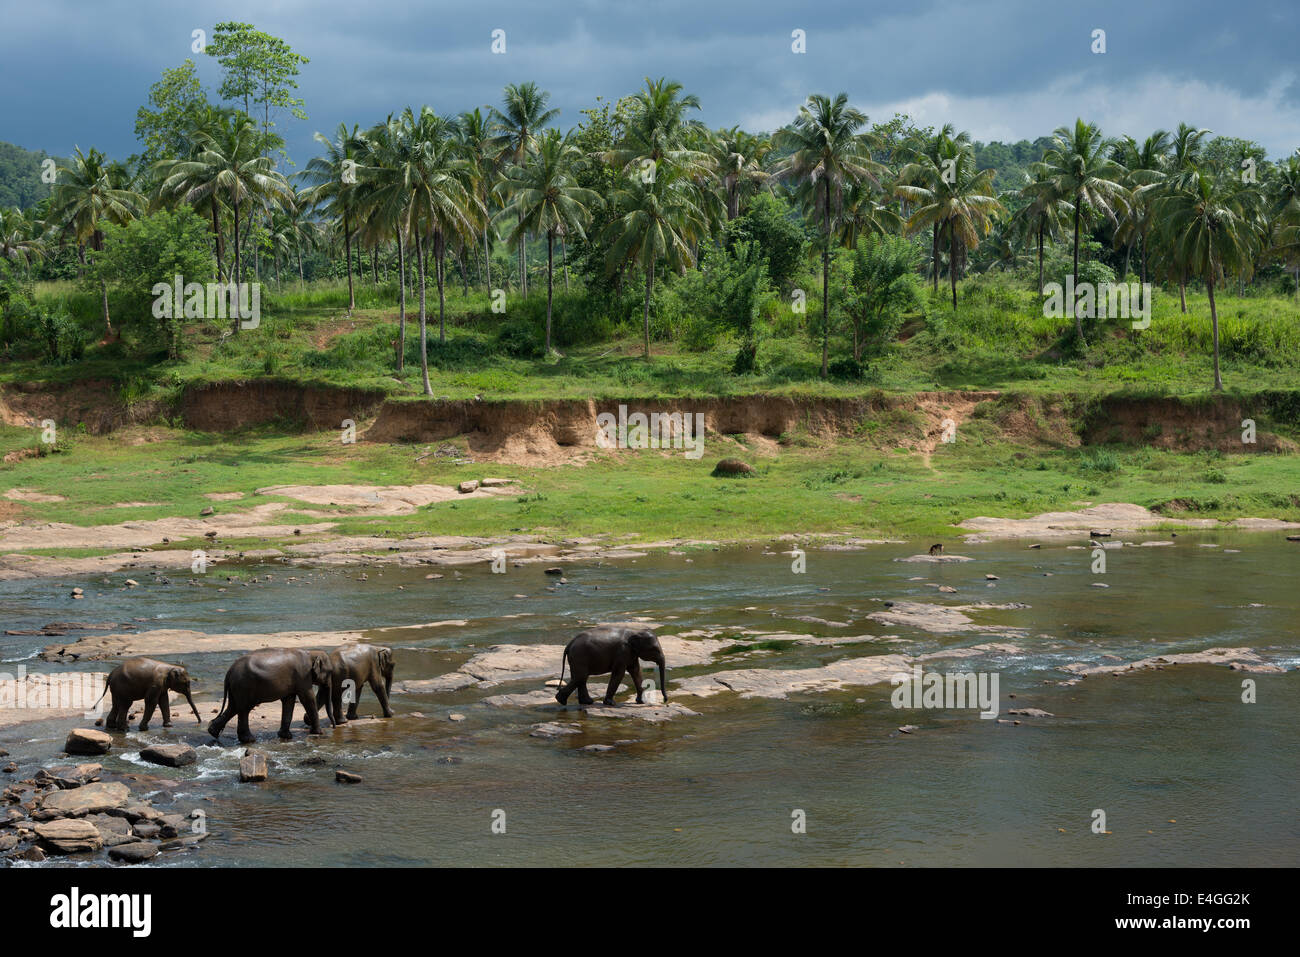 Four Sri Lankan elephants walk along a river with a background of palm trees Stock Photo